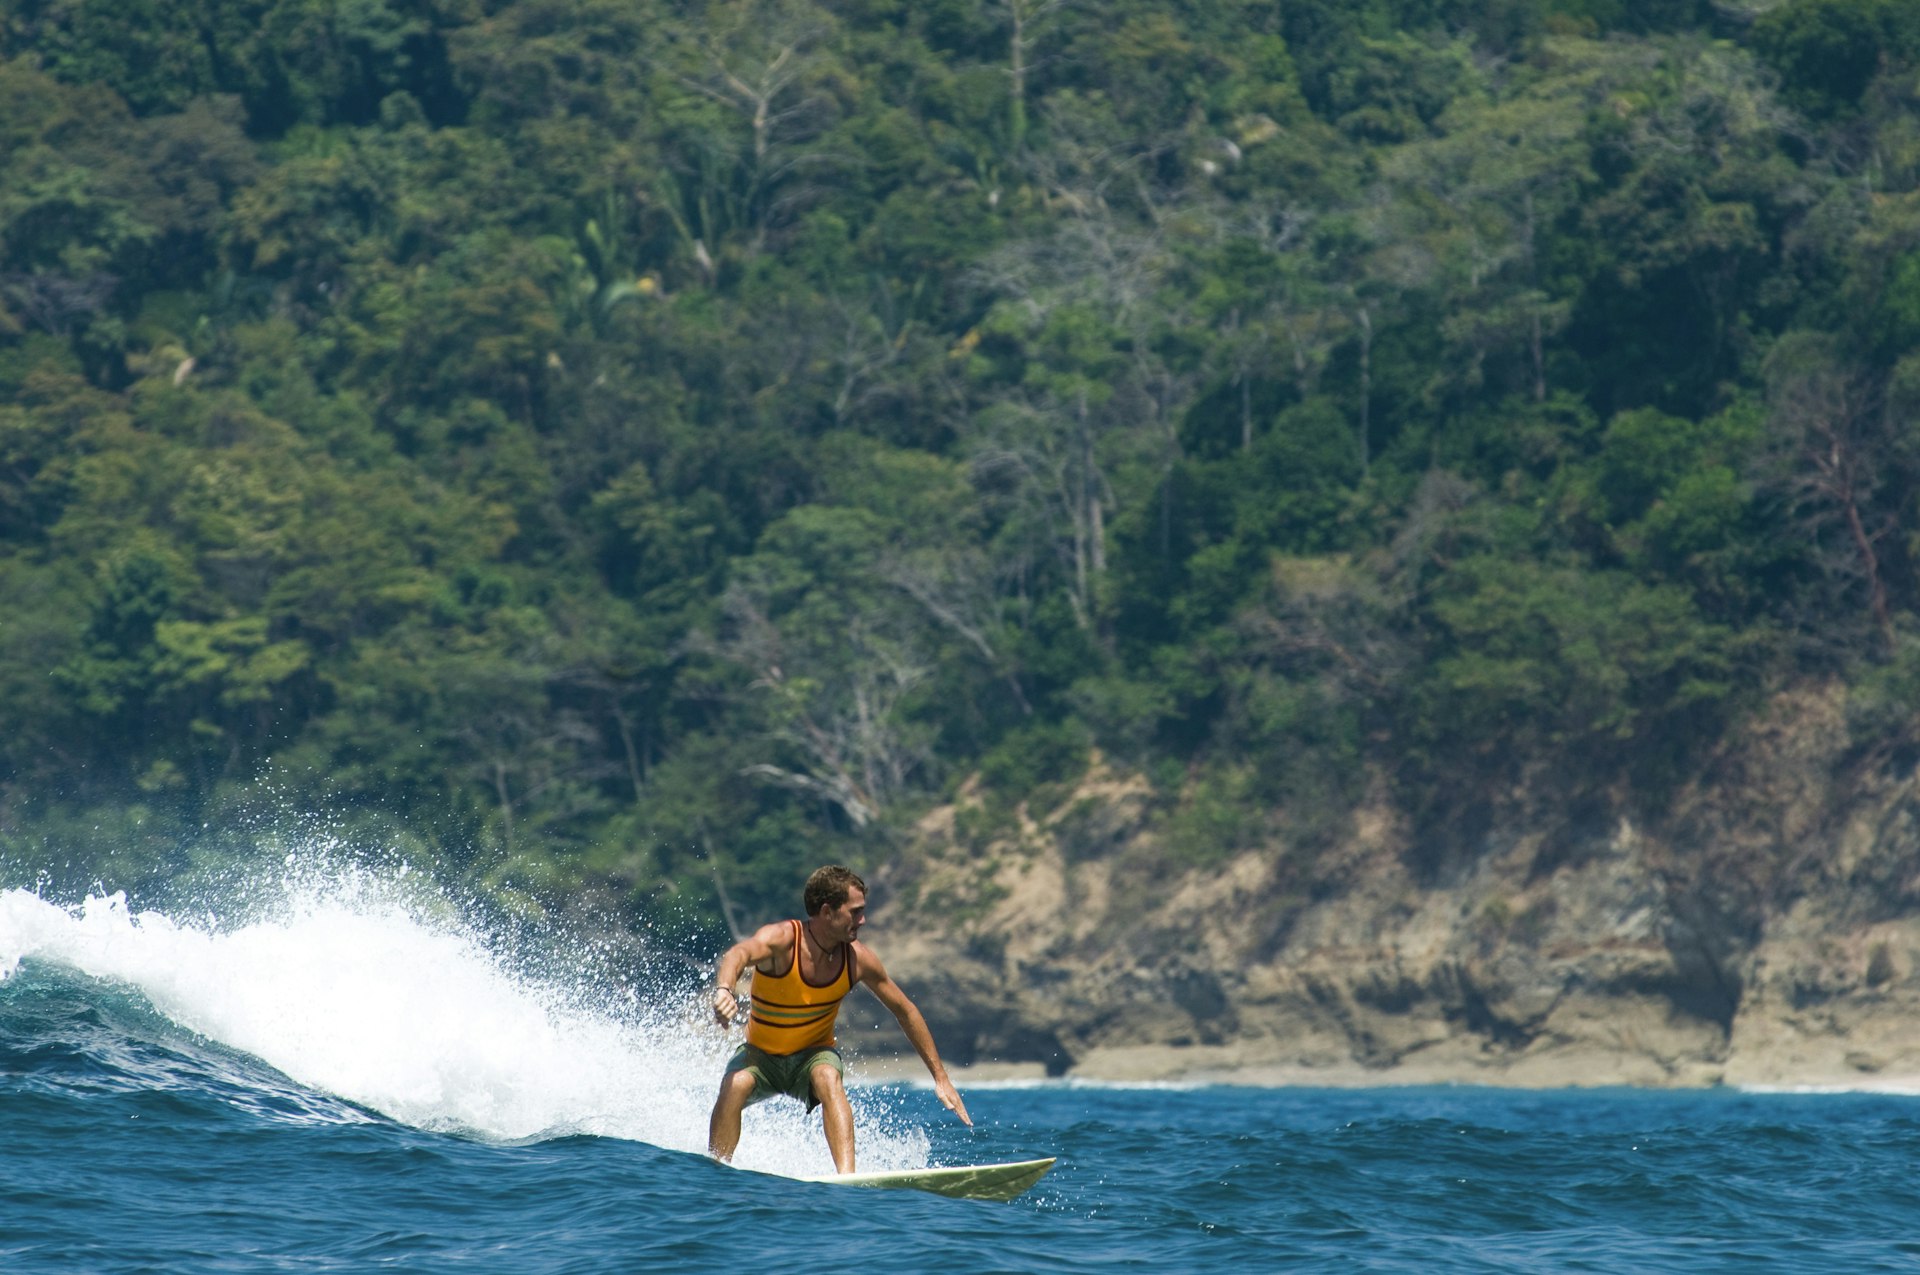 A young man surfing in Costa Rica